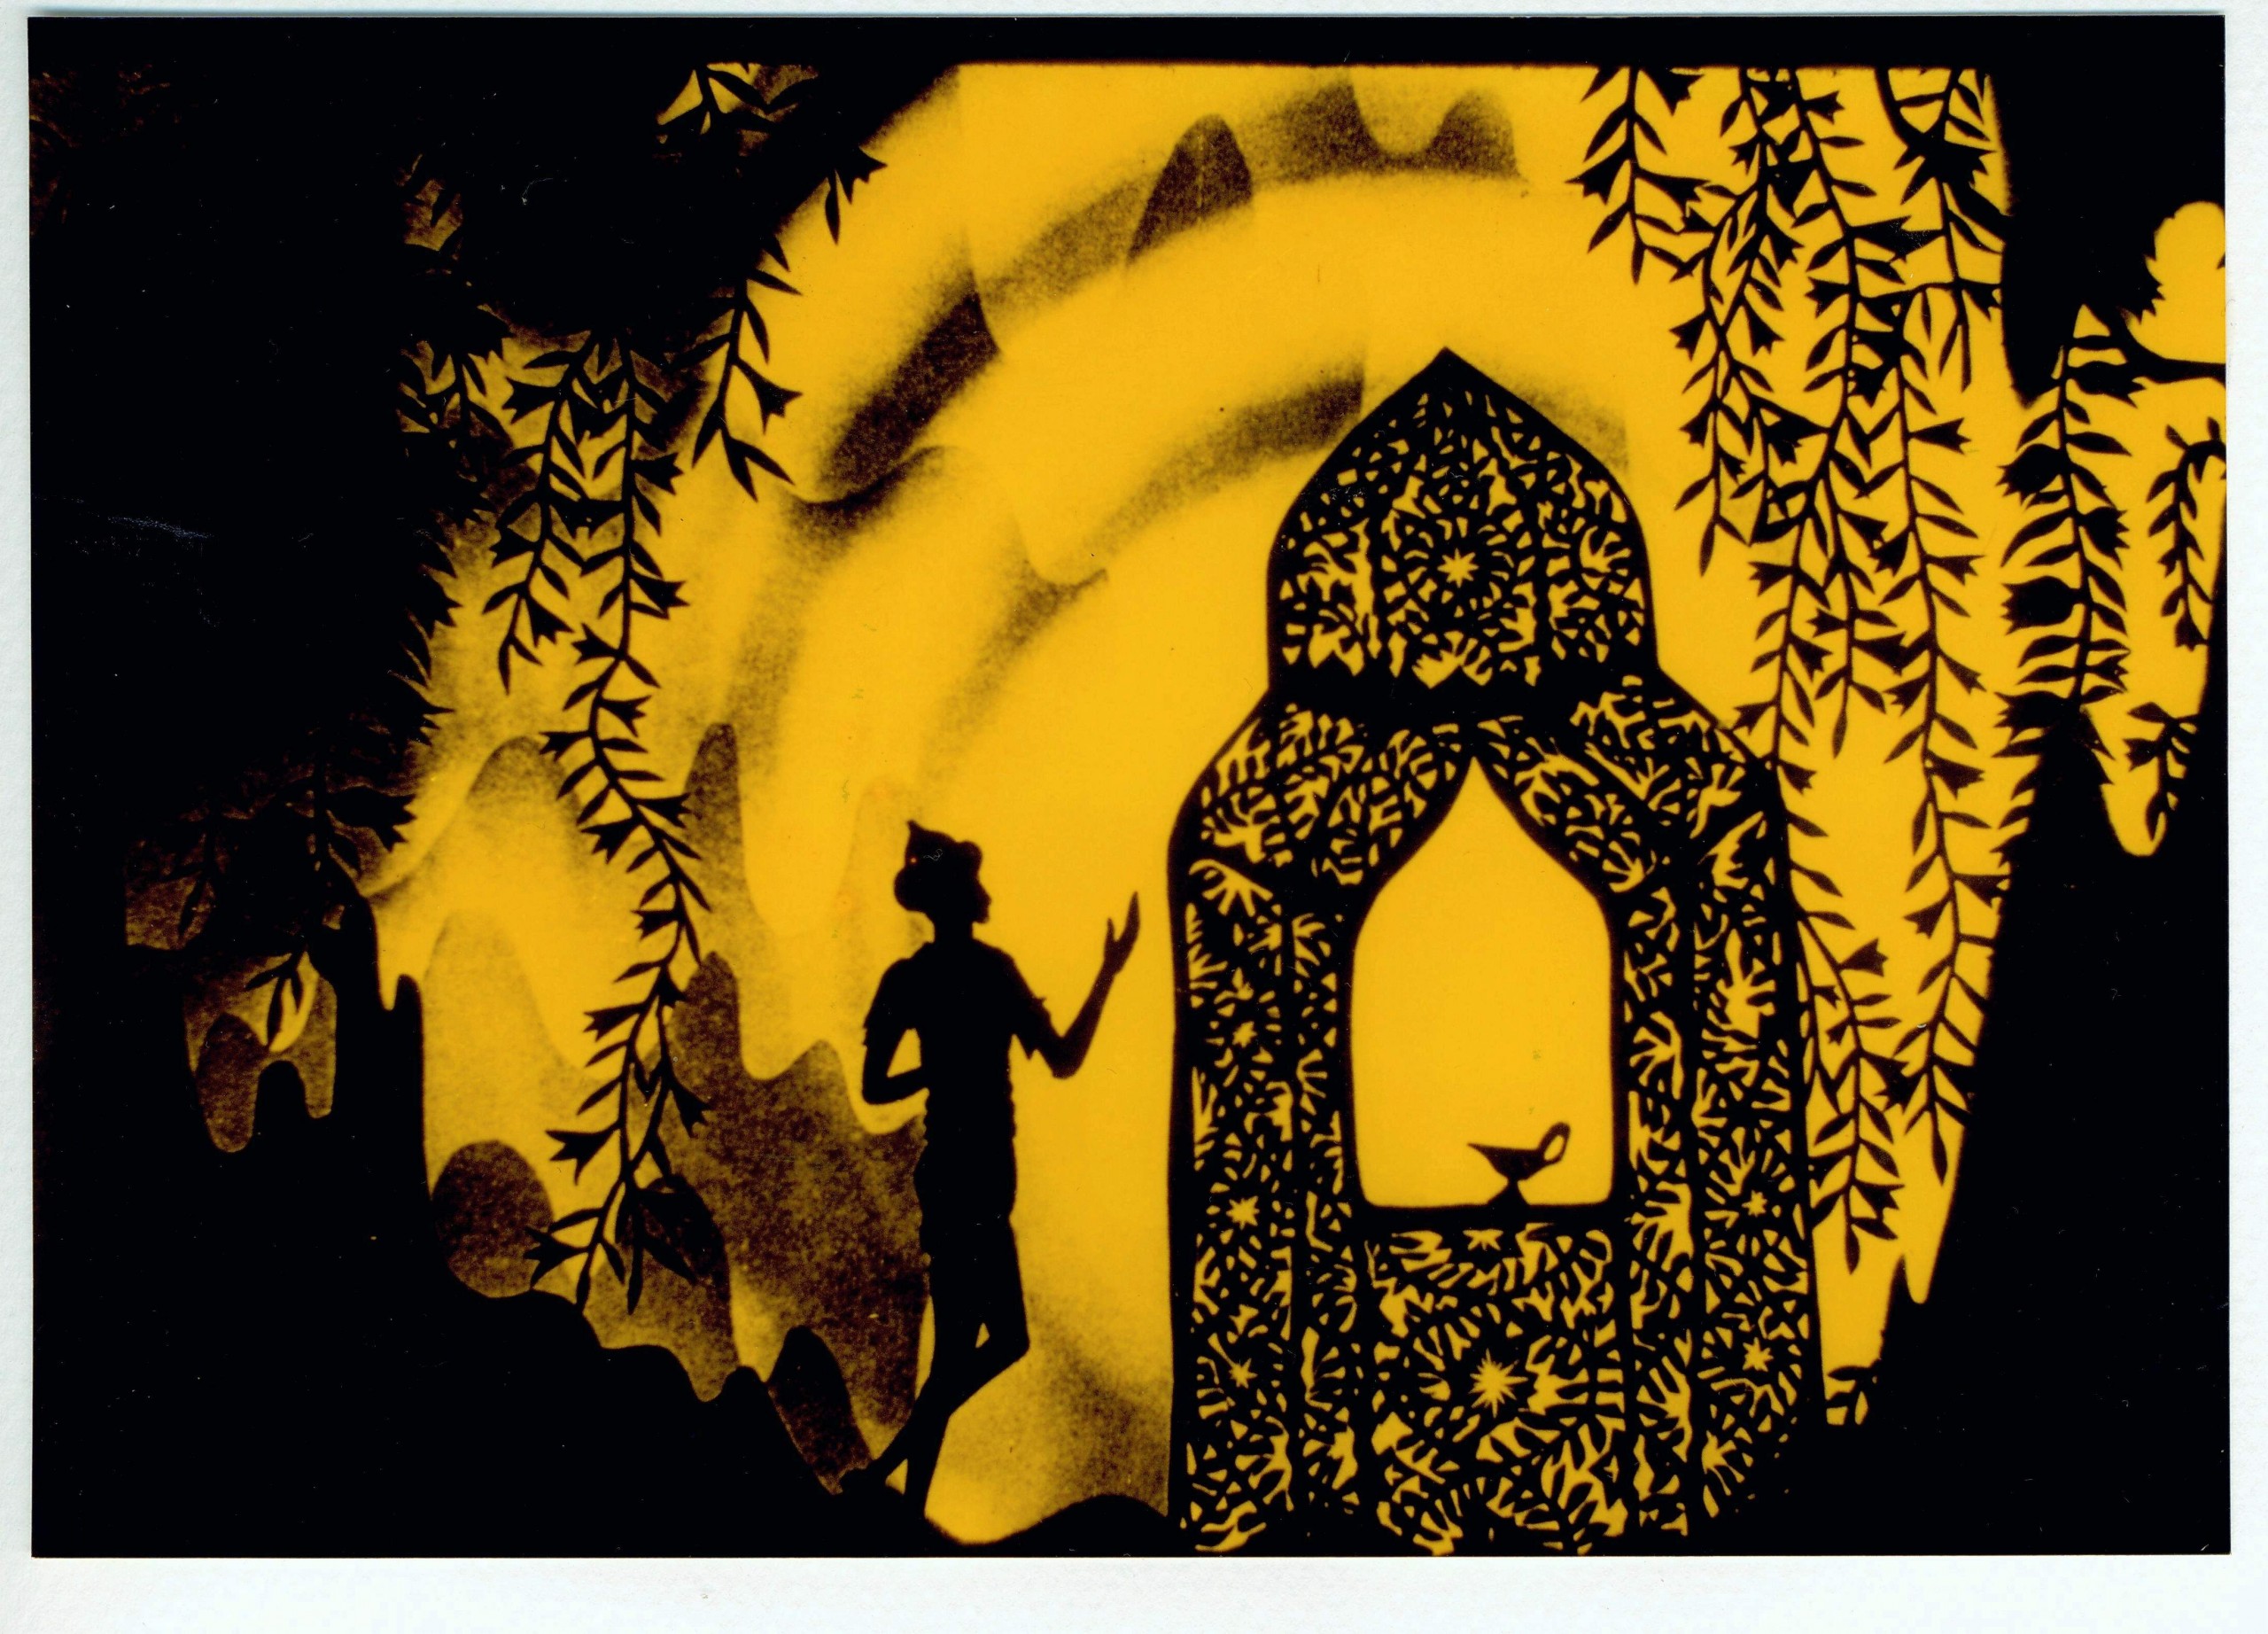 Lotte in the Land of Shadows:  L. Reiniger - Avant-Garde of the Animation Film (1899-1981) 